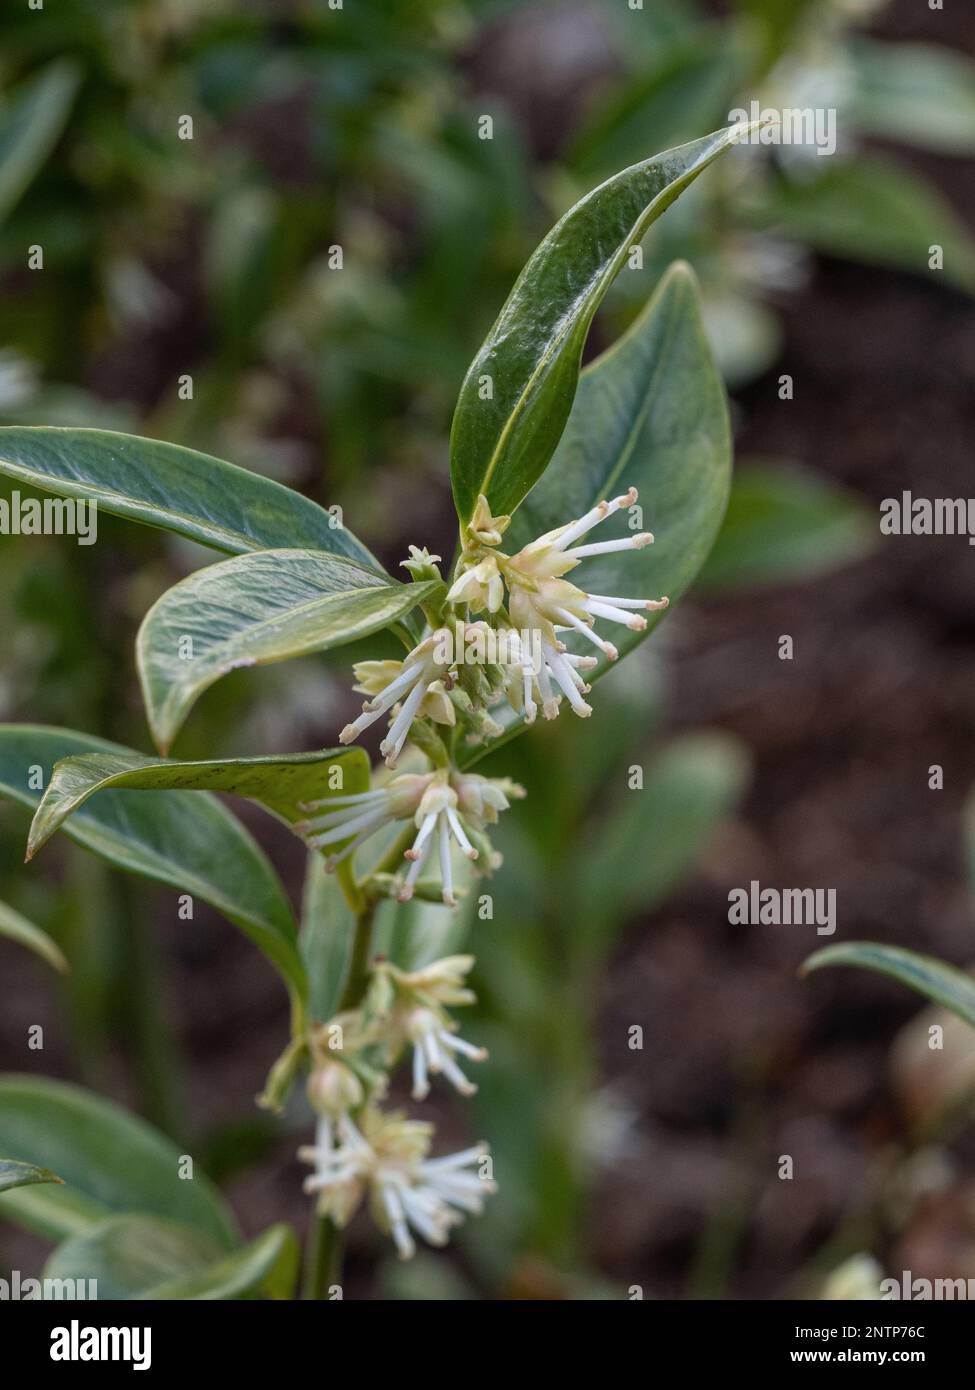 A single flowering stem of the winter flowering evergreen Sarcocca confusa Stock Photo